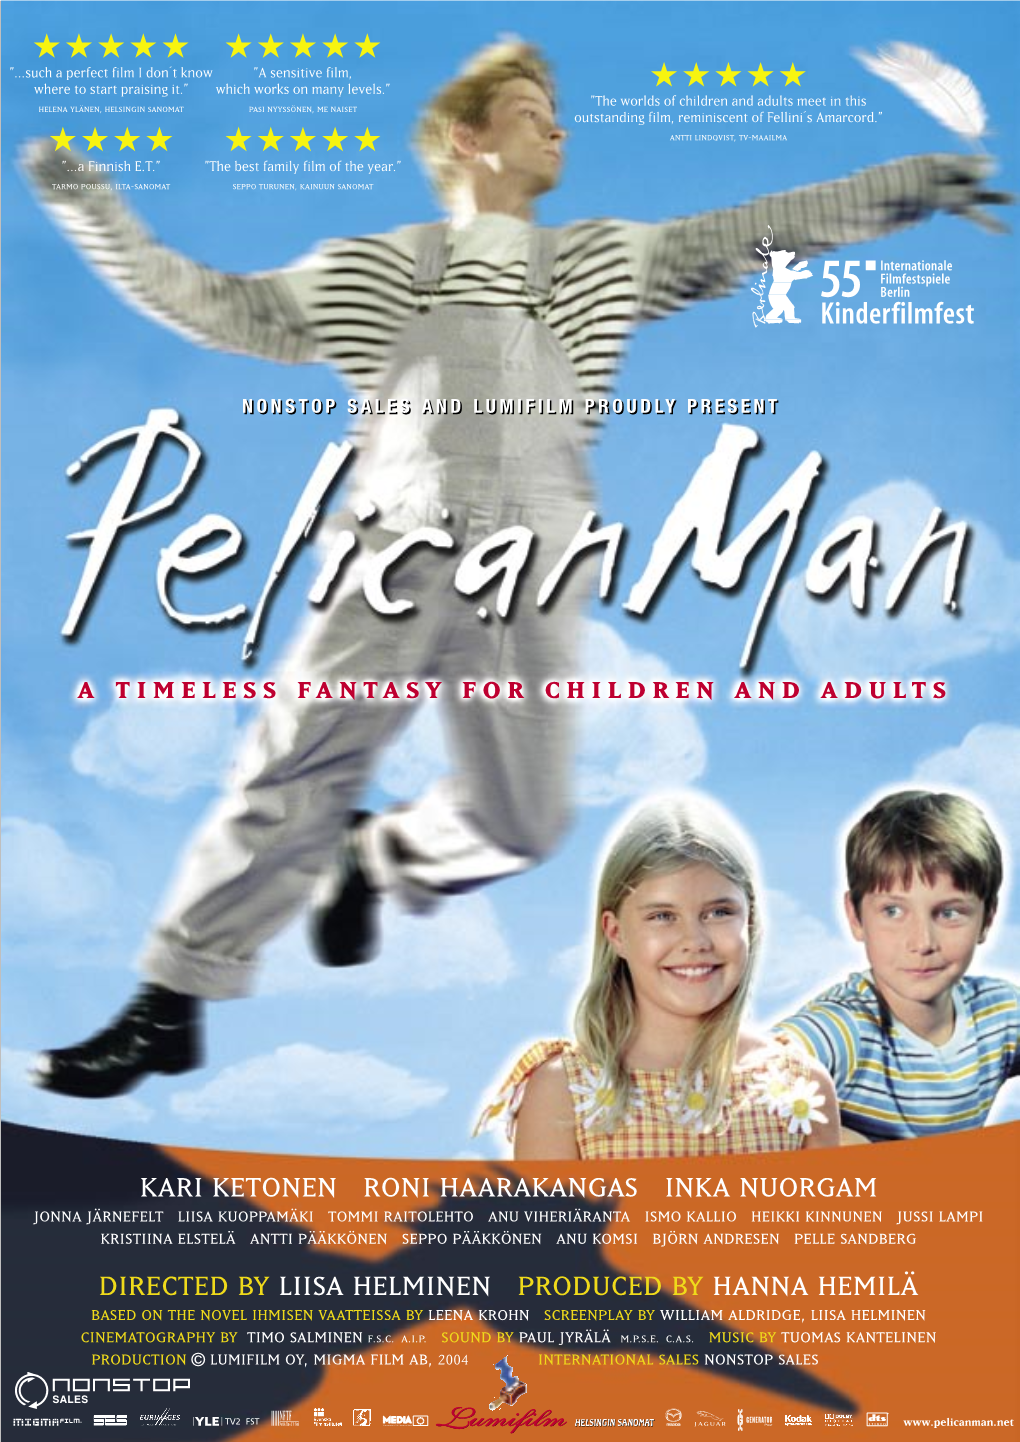 The Pelicanman Flyer 210X297.Indd